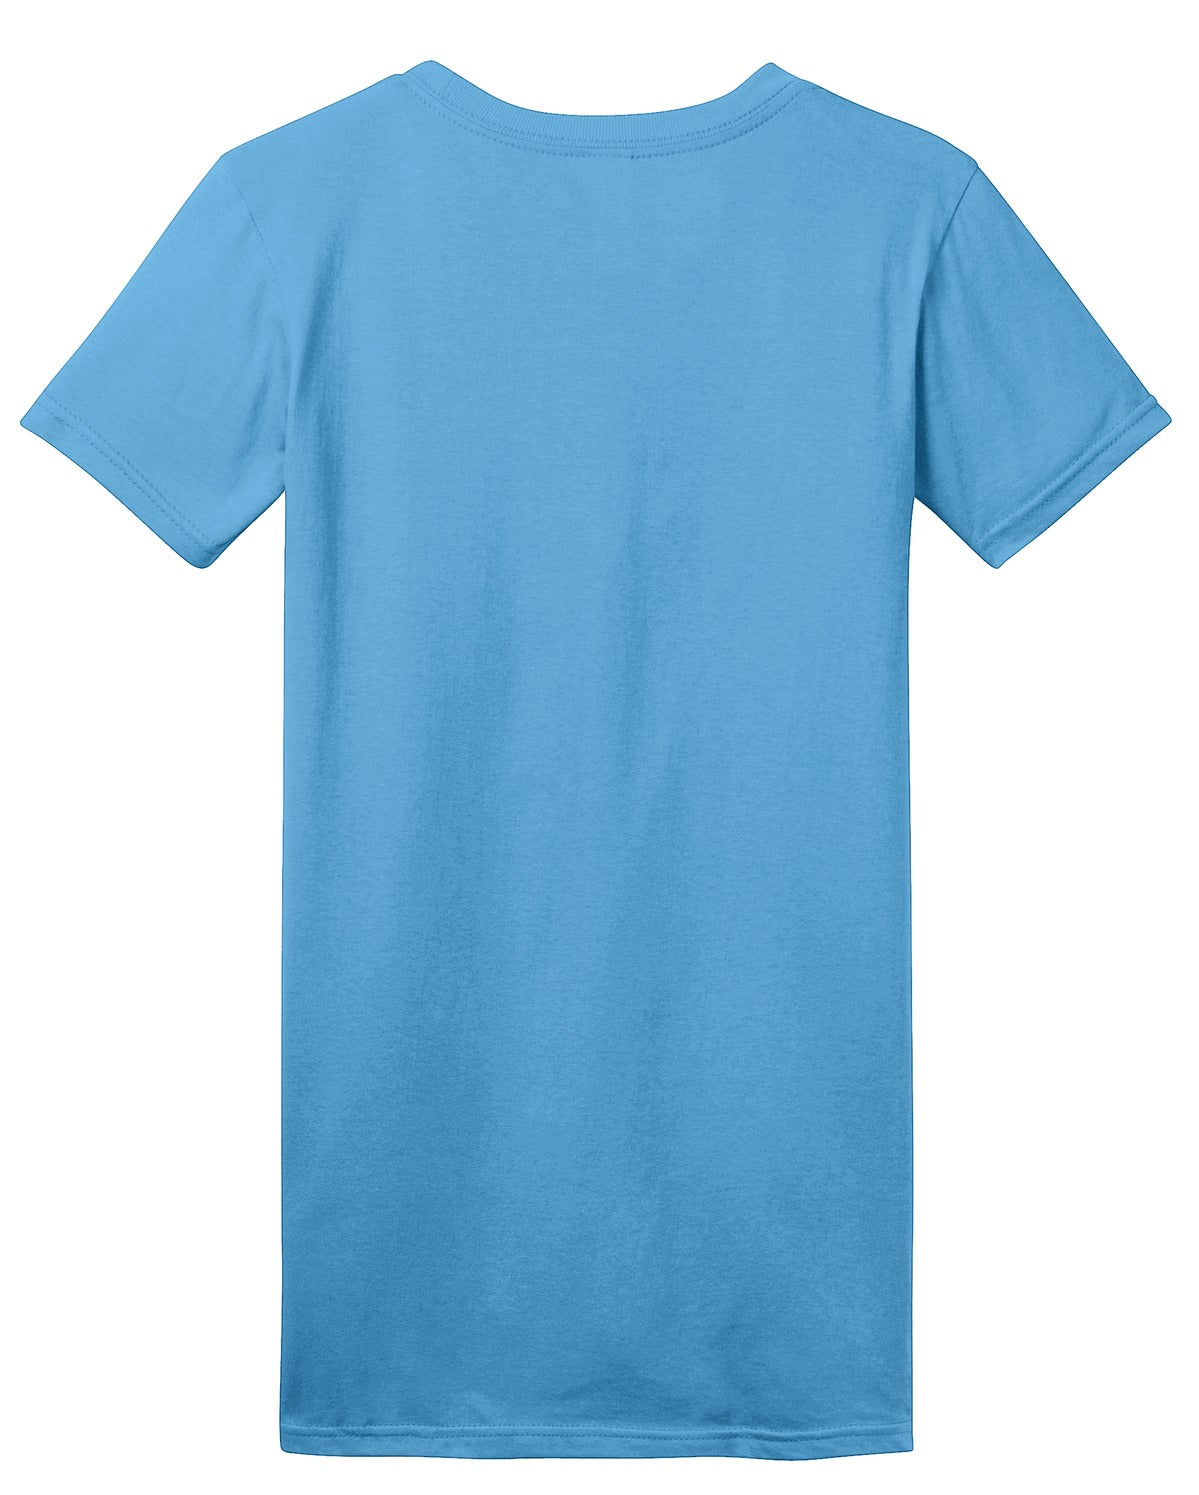 District Women's Fitted The Concert Tee DT5001 - Aquatic Blue